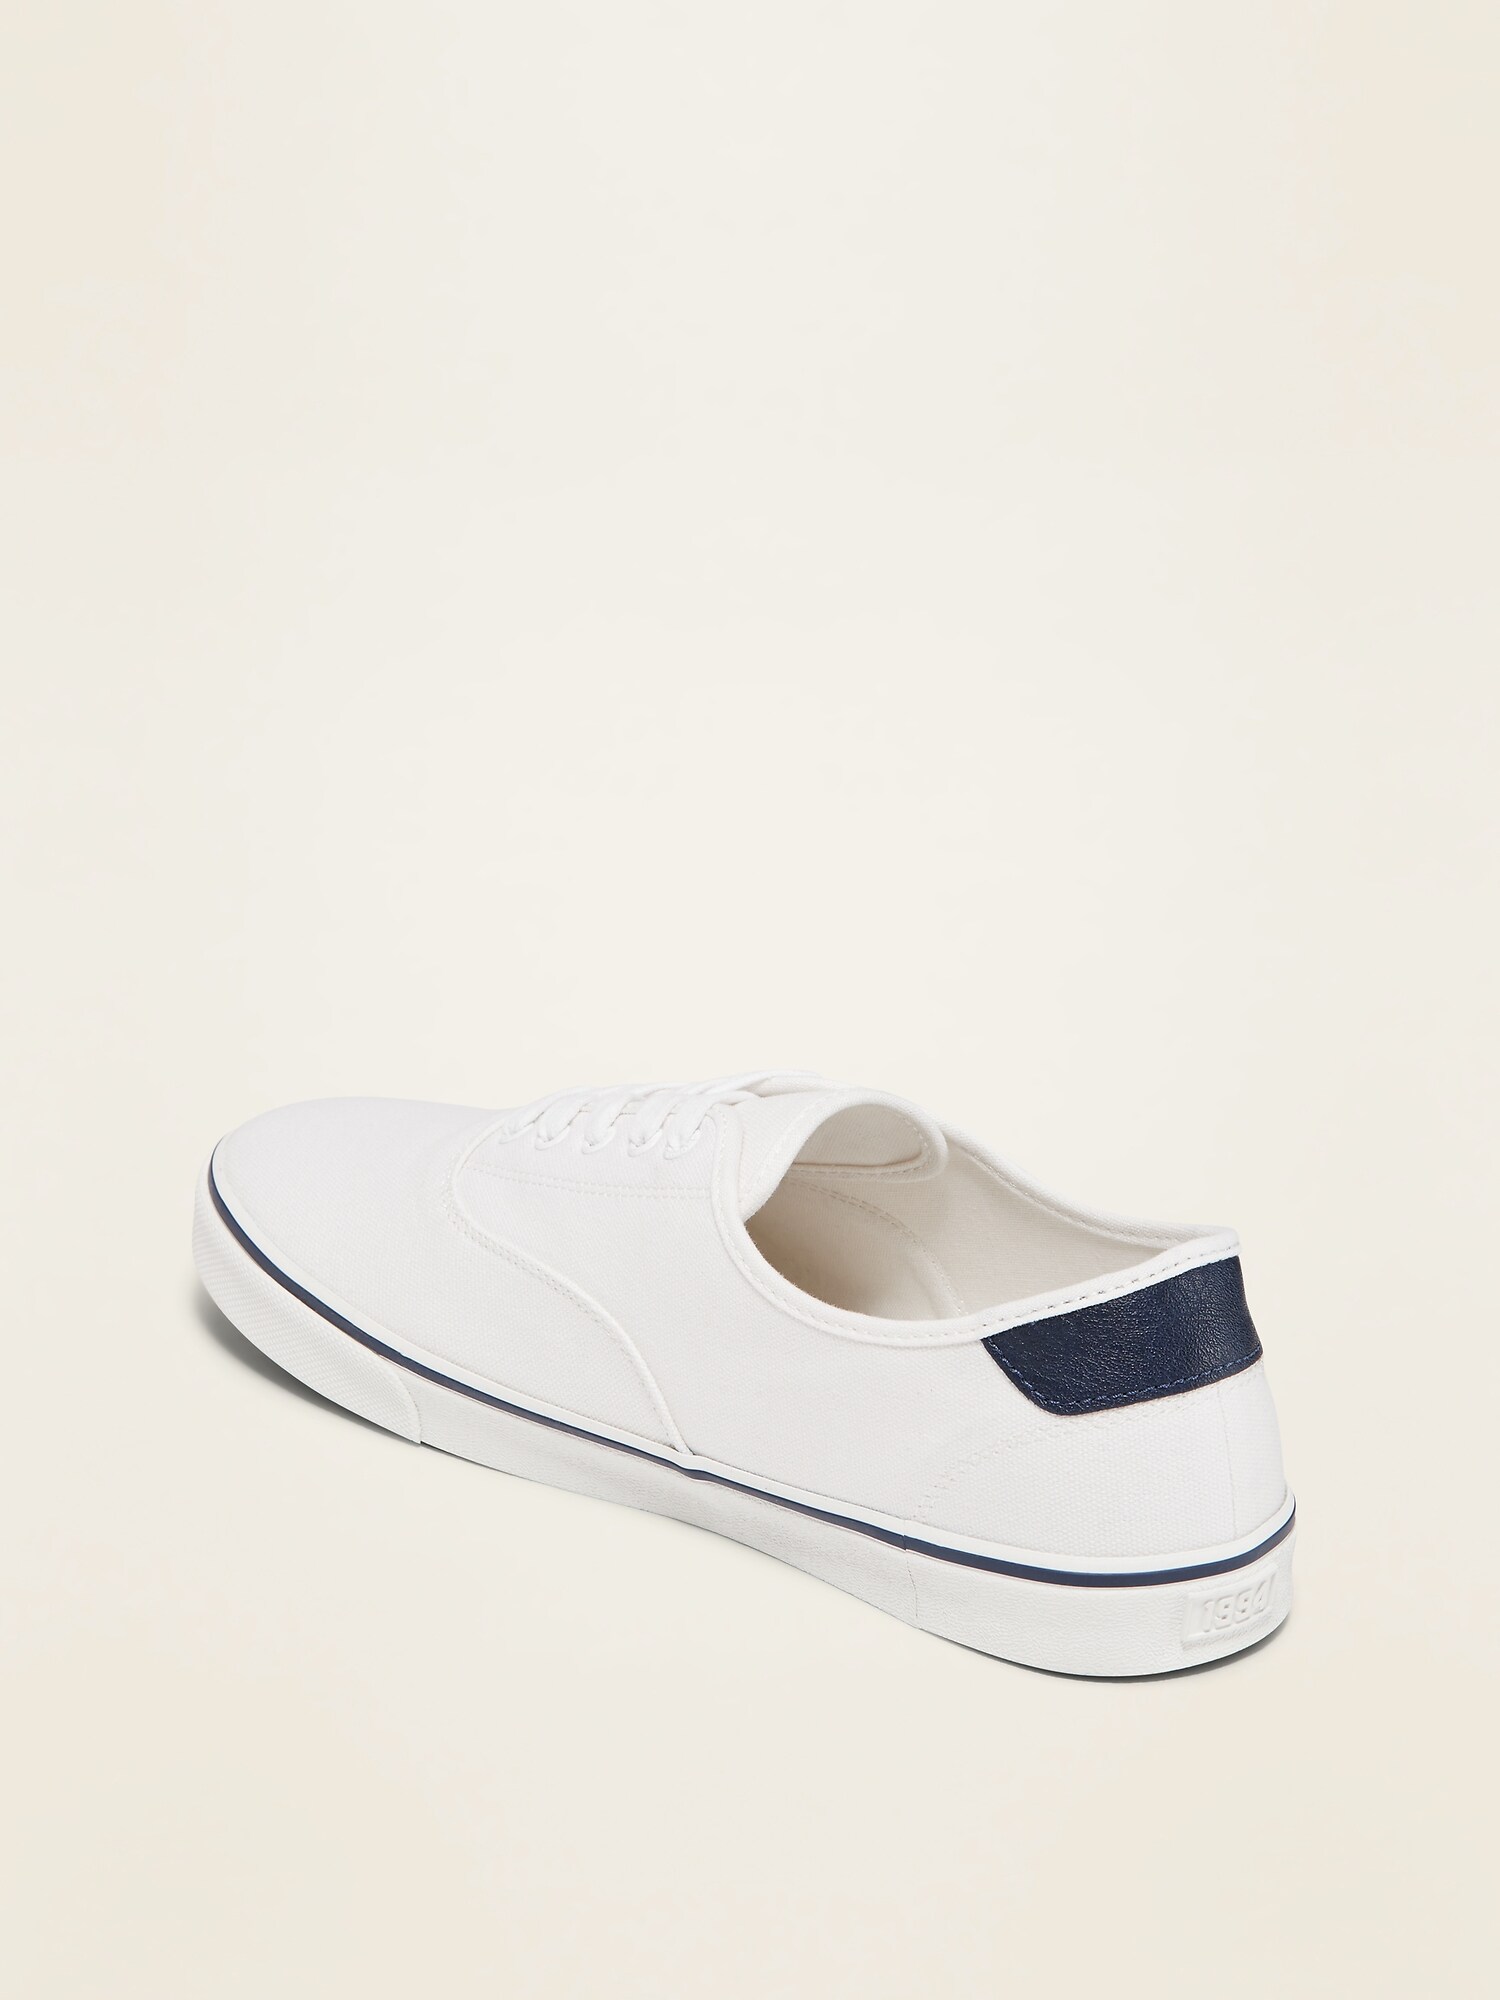 old navy mens canvas shoes